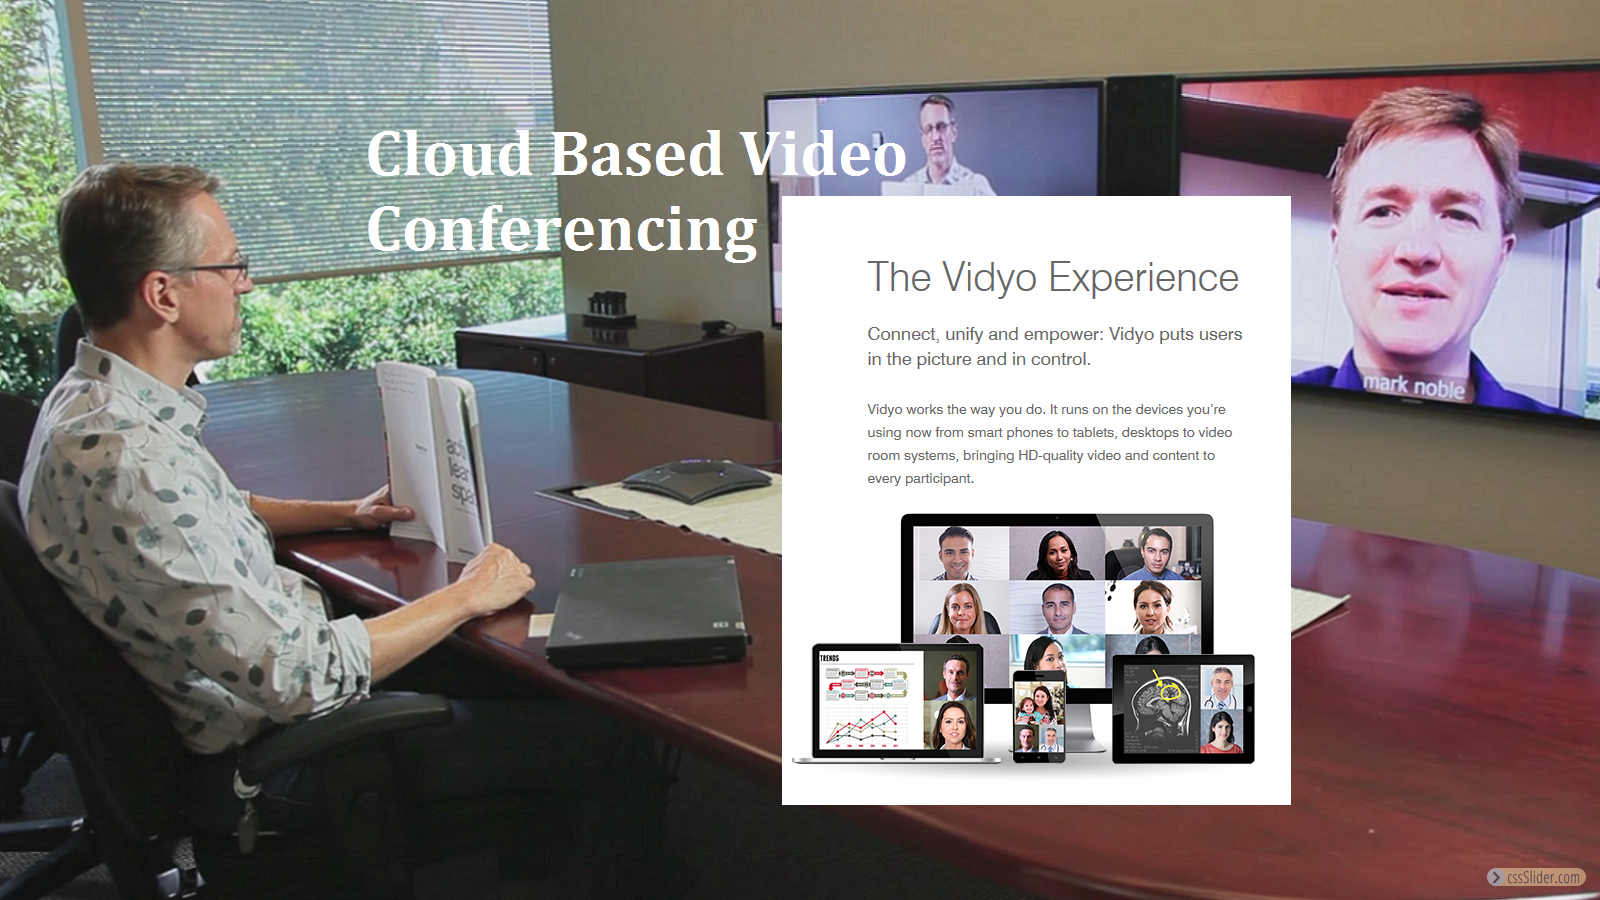 Cloud Based Video Conferencing